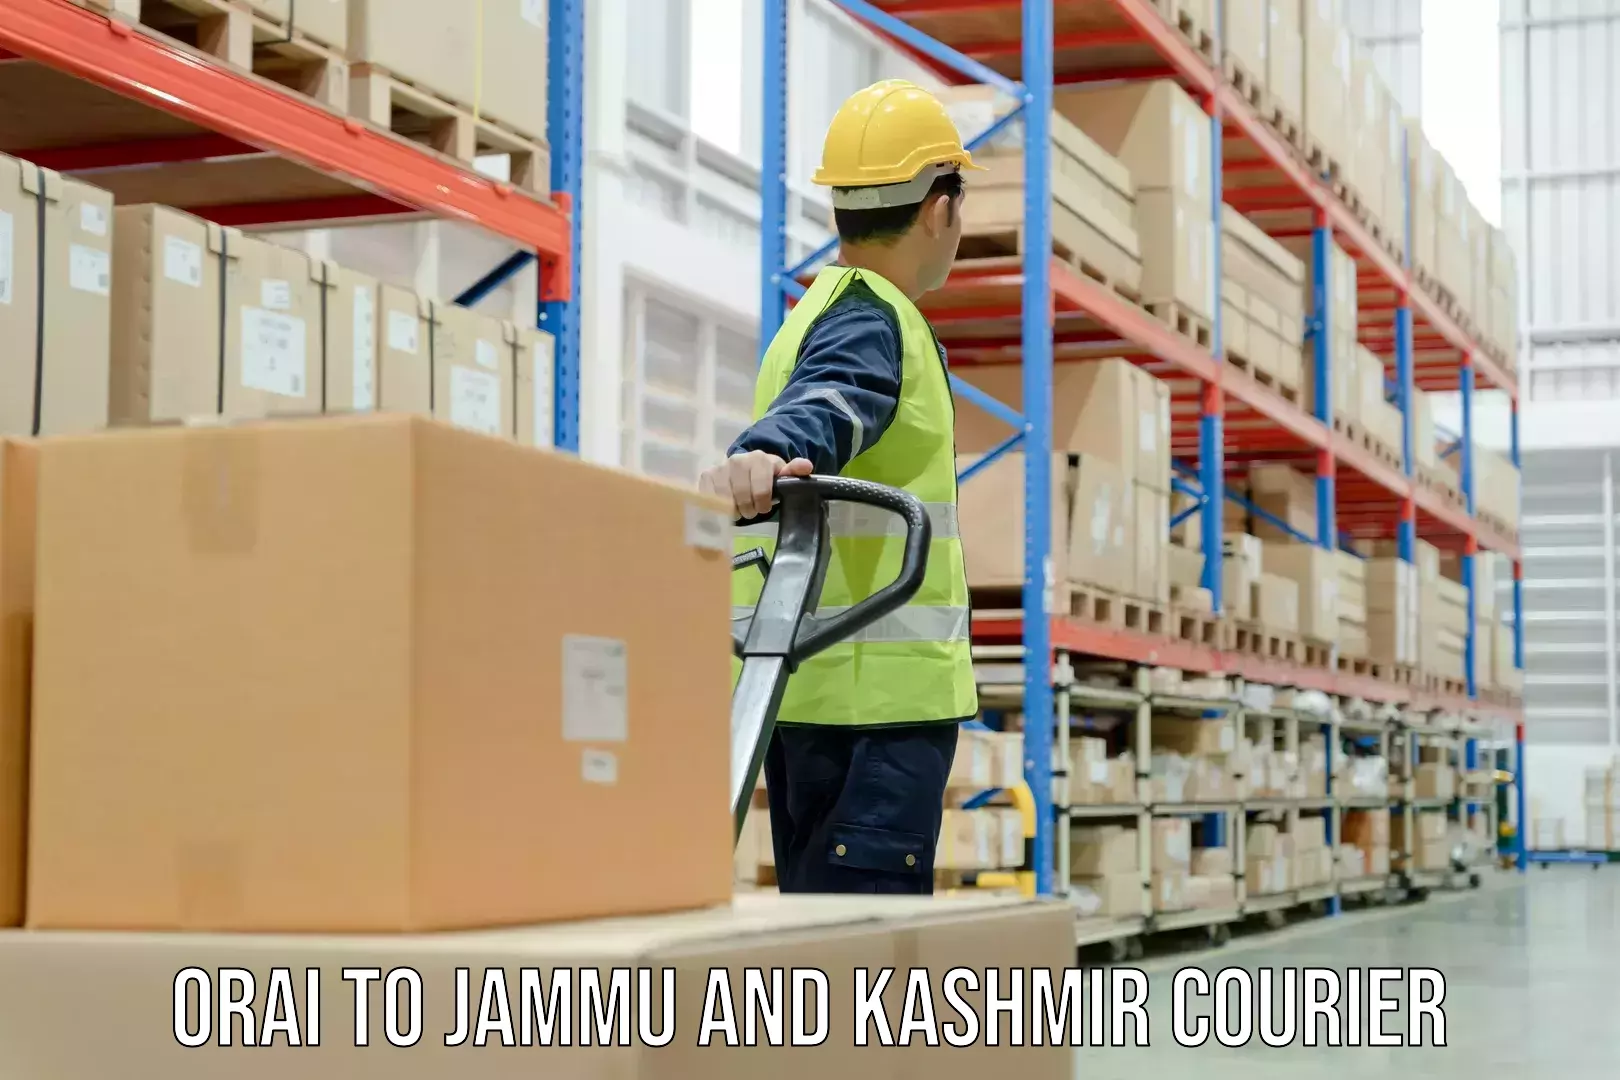 Courier service efficiency Orai to Jammu and Kashmir